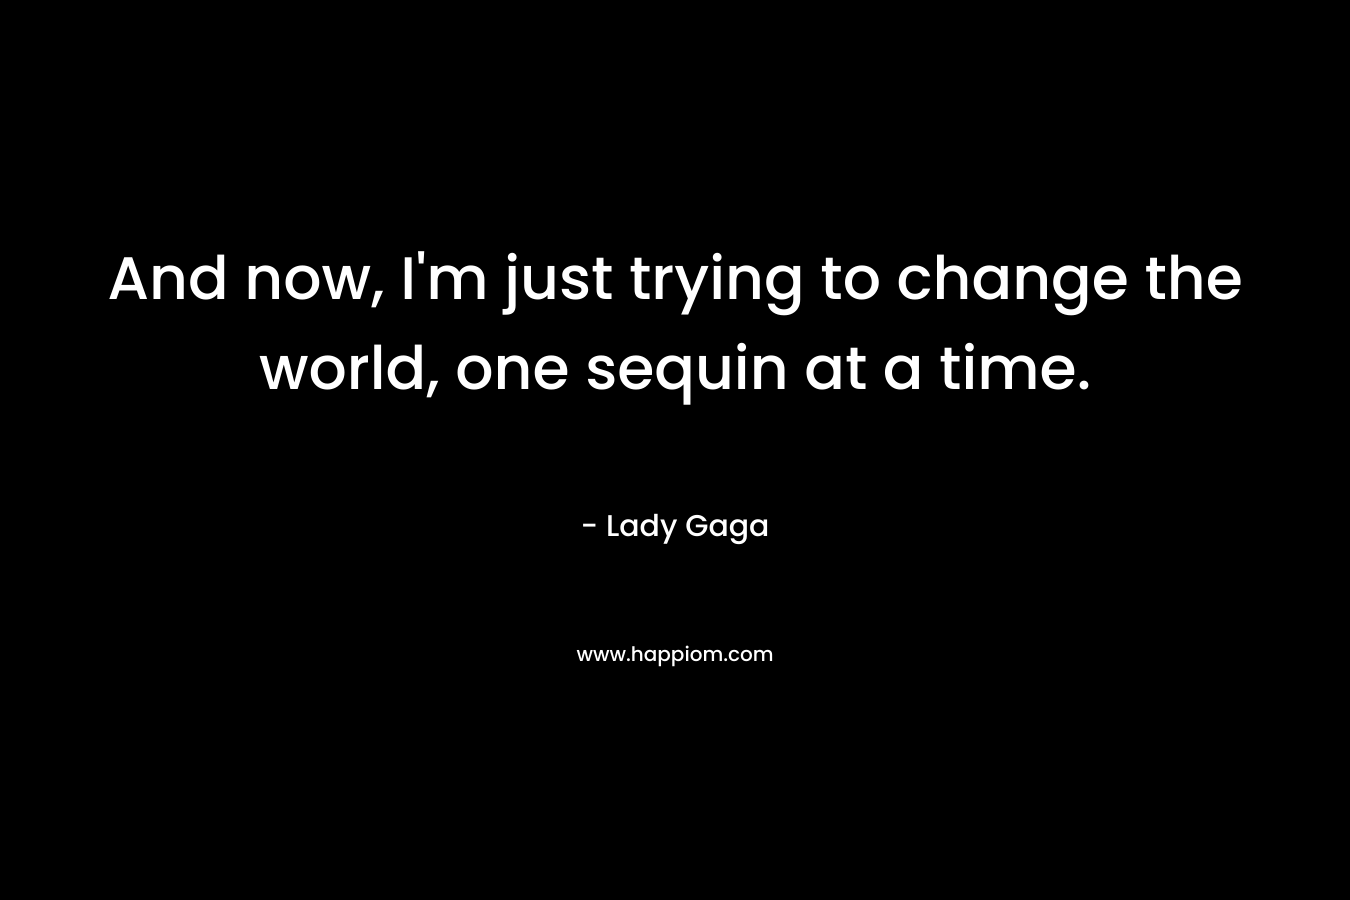 And now, I'm just trying to change the world, one sequin at a time.